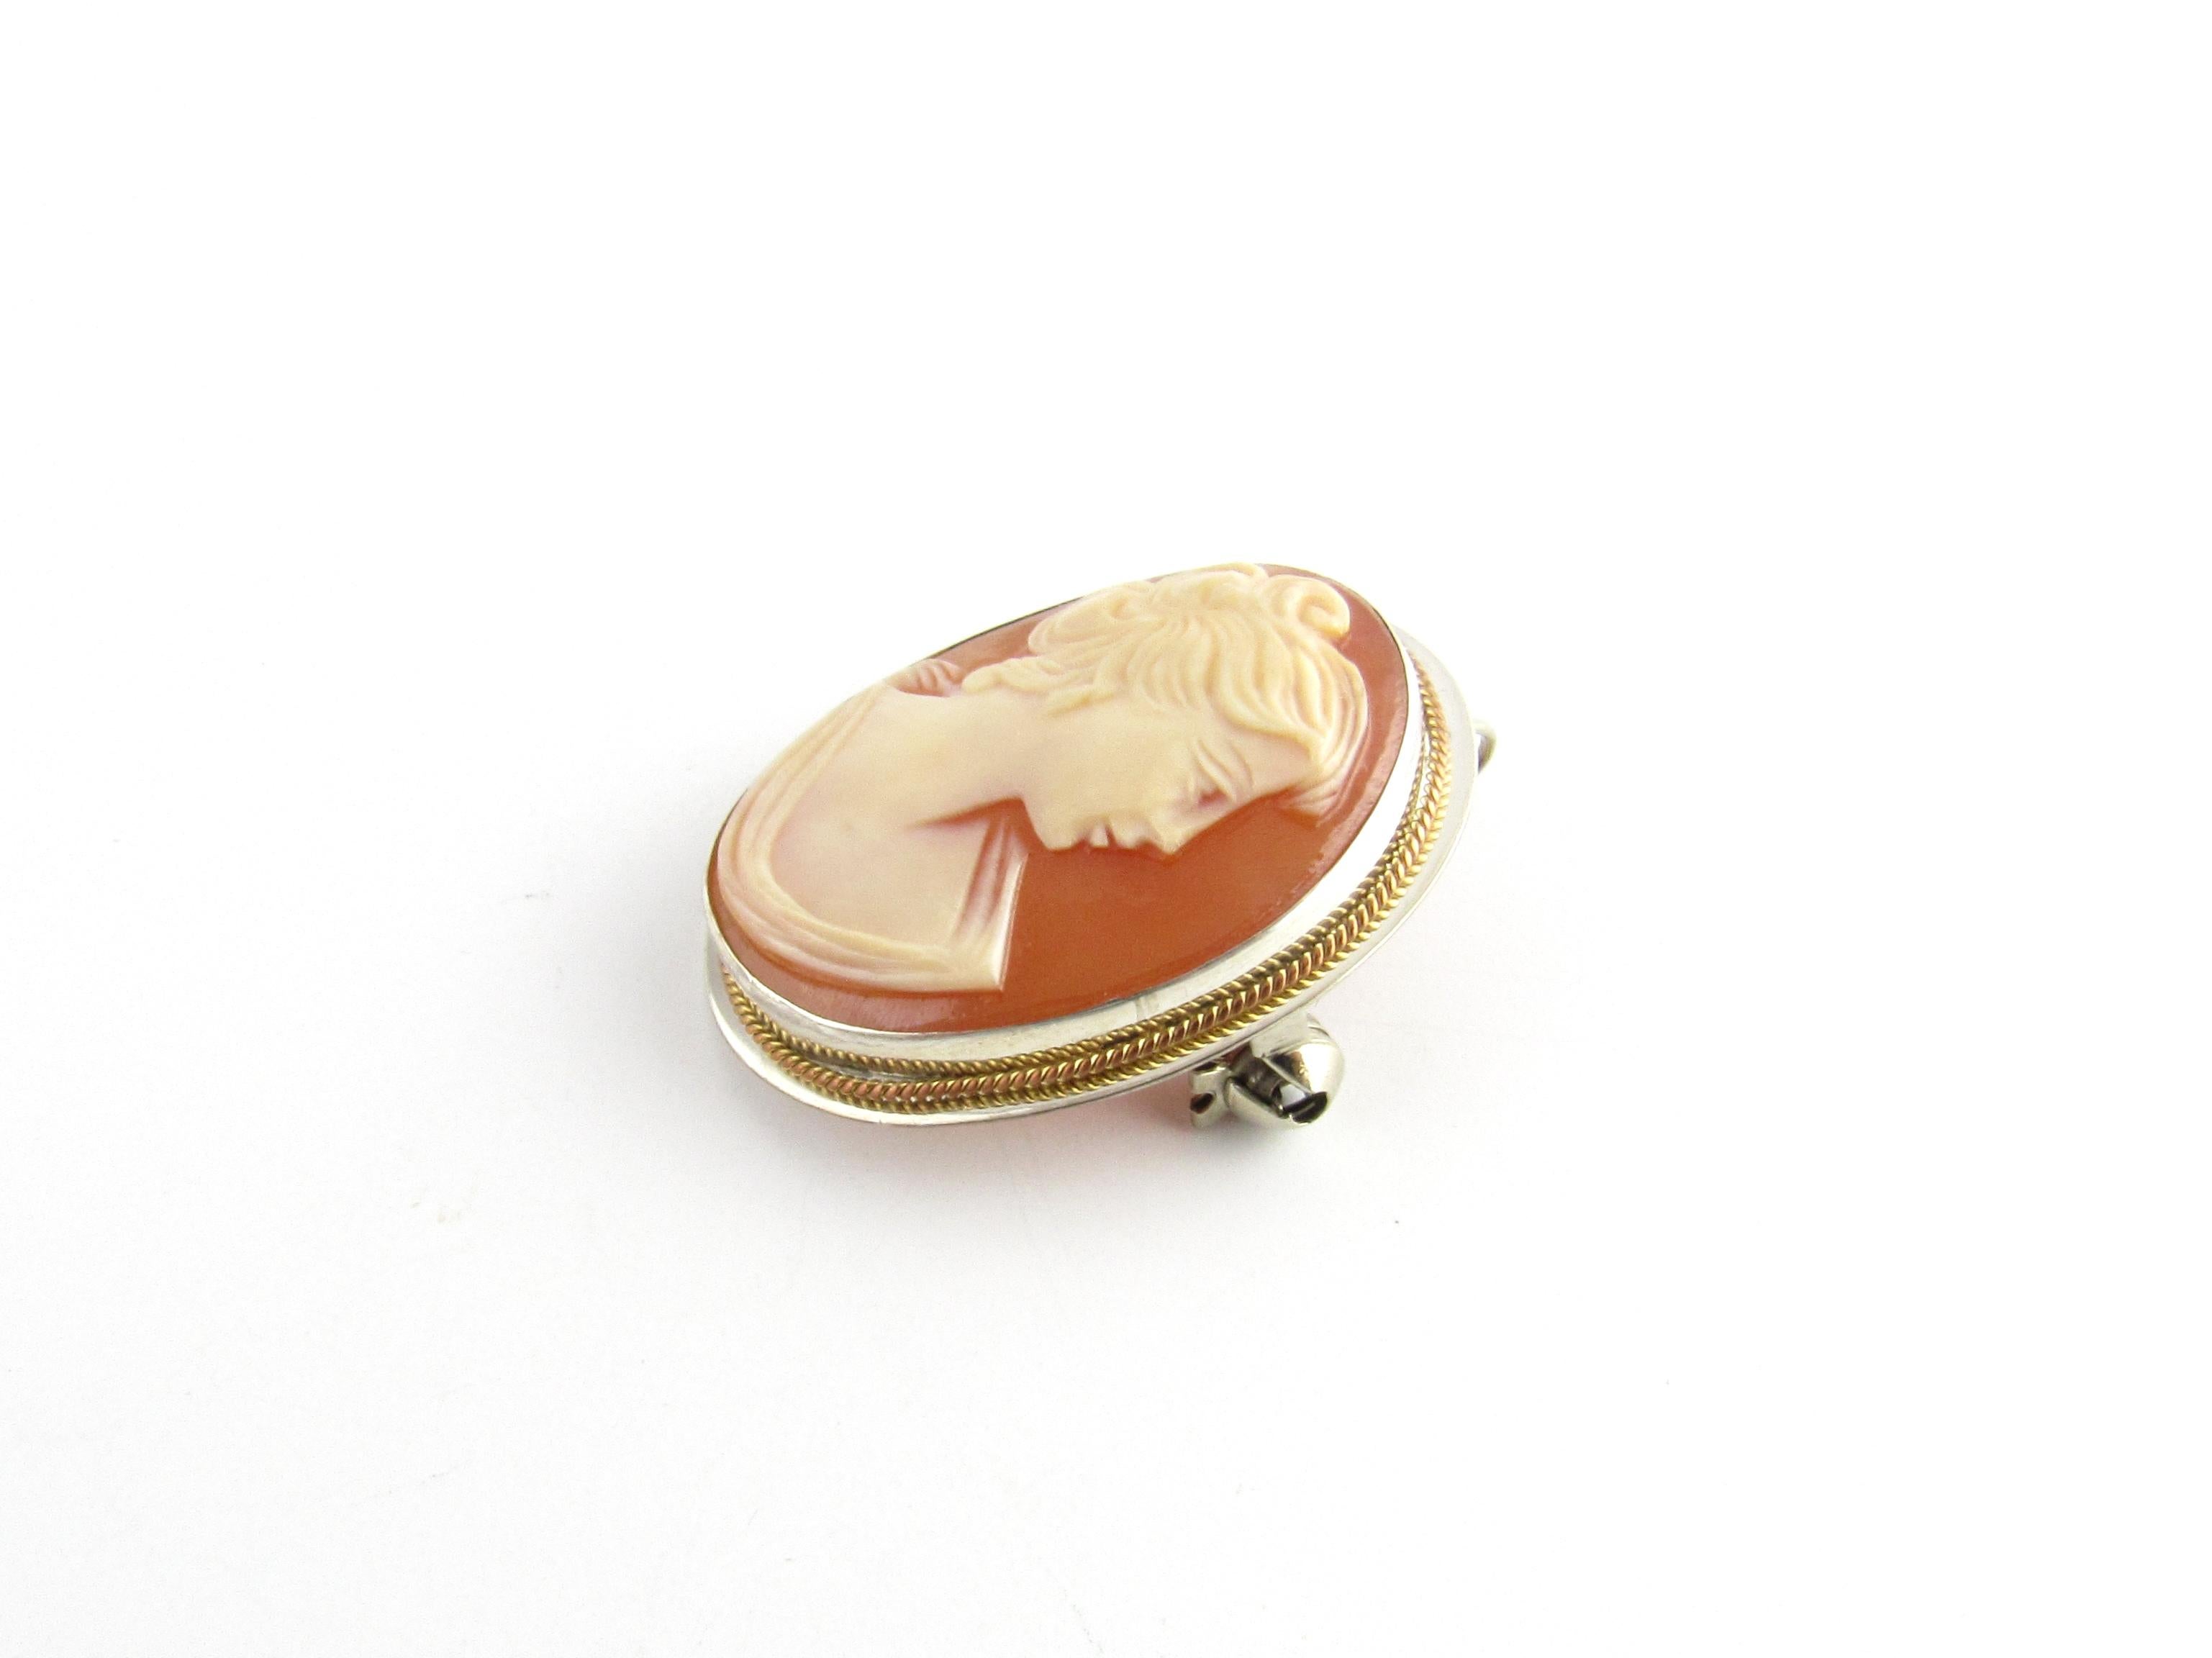 900 Sterling Silver Cameo Pendant/Pin-

This classic cameo features a lovely lady in profile framed in 900 sterling silver.  Can be worn as a pendant or brooch.

Size: 27 mm x 22 mm 

Weight: 2.5 dwt. / 4.0g

Hallmark: 900

Very good condition,